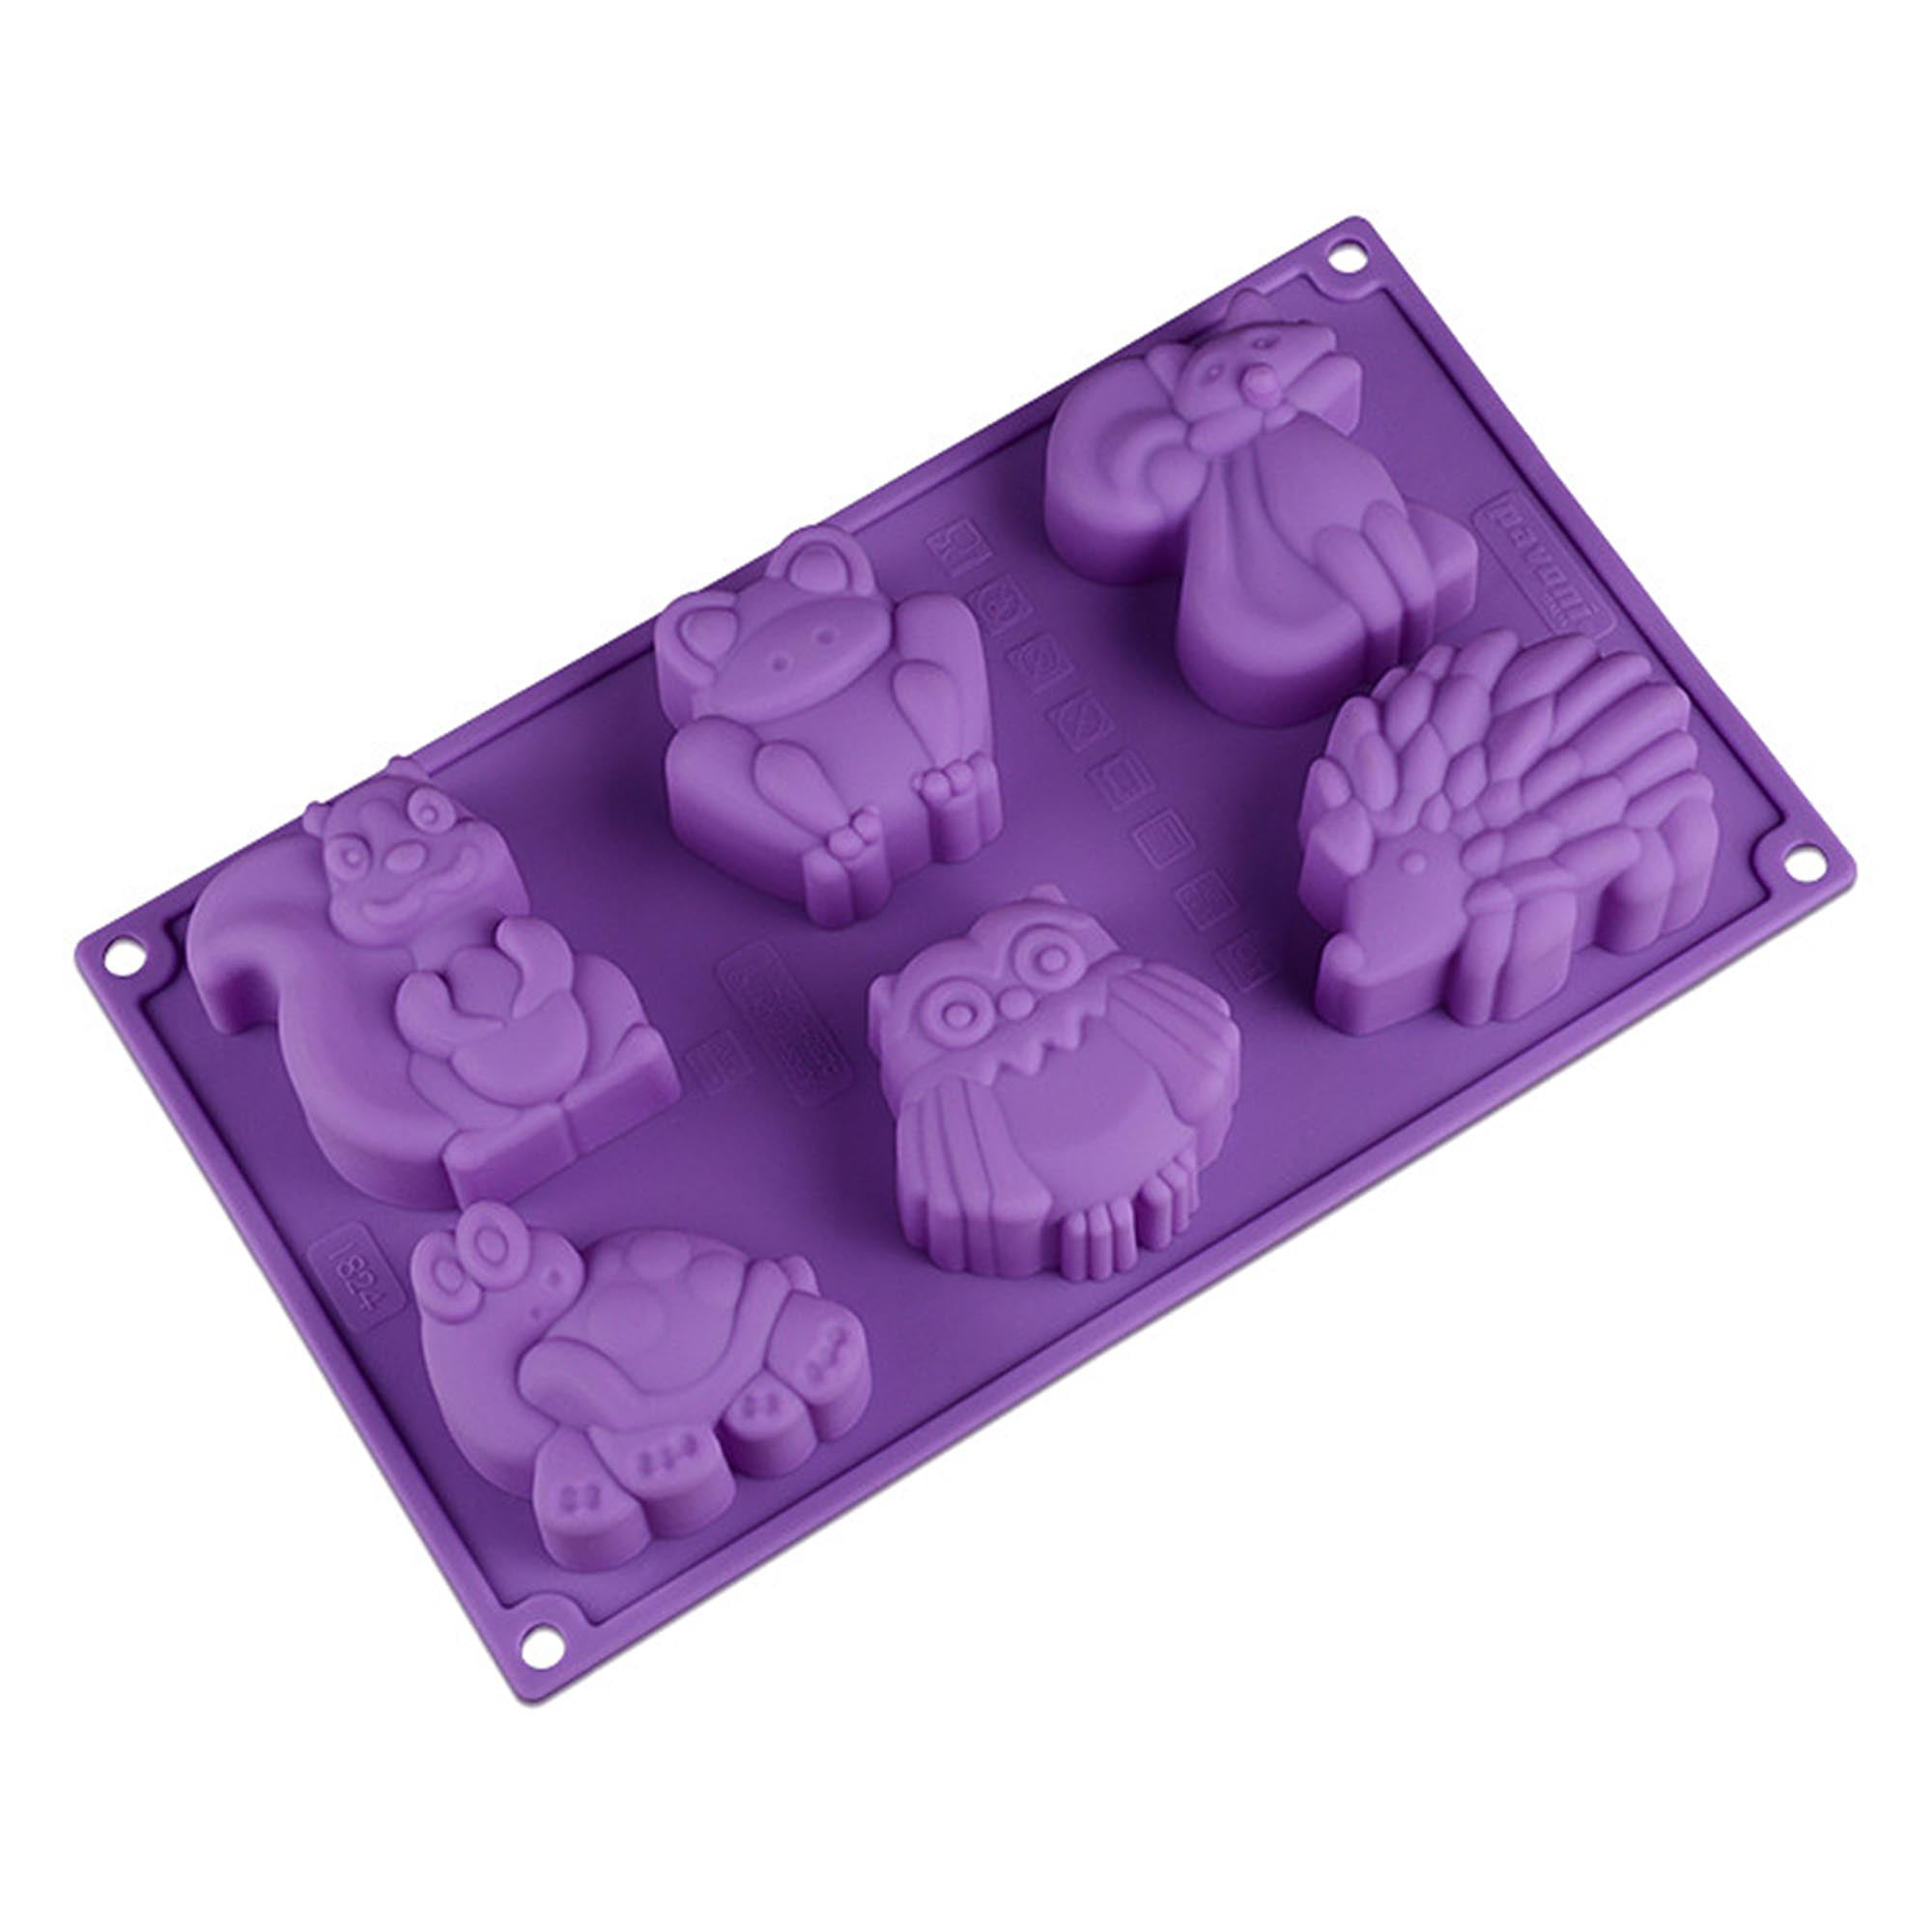 Hedgehog Shape Silicone Cake Decorating Moulds Cookies Chocolate Baking Molds 6A 